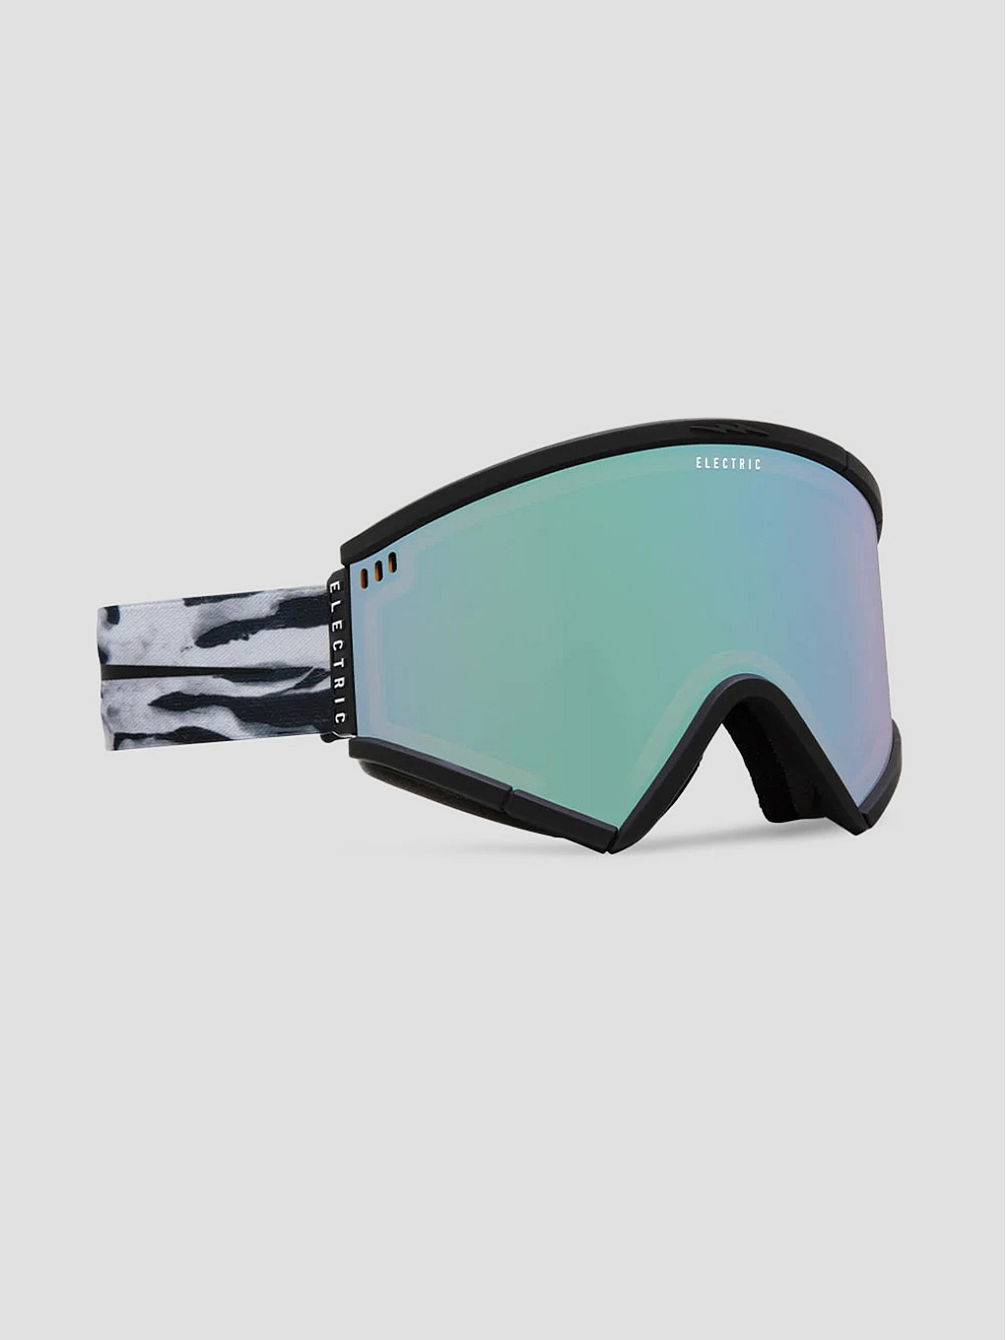 Roteck Christenson Collab Atomic Ice Goggle